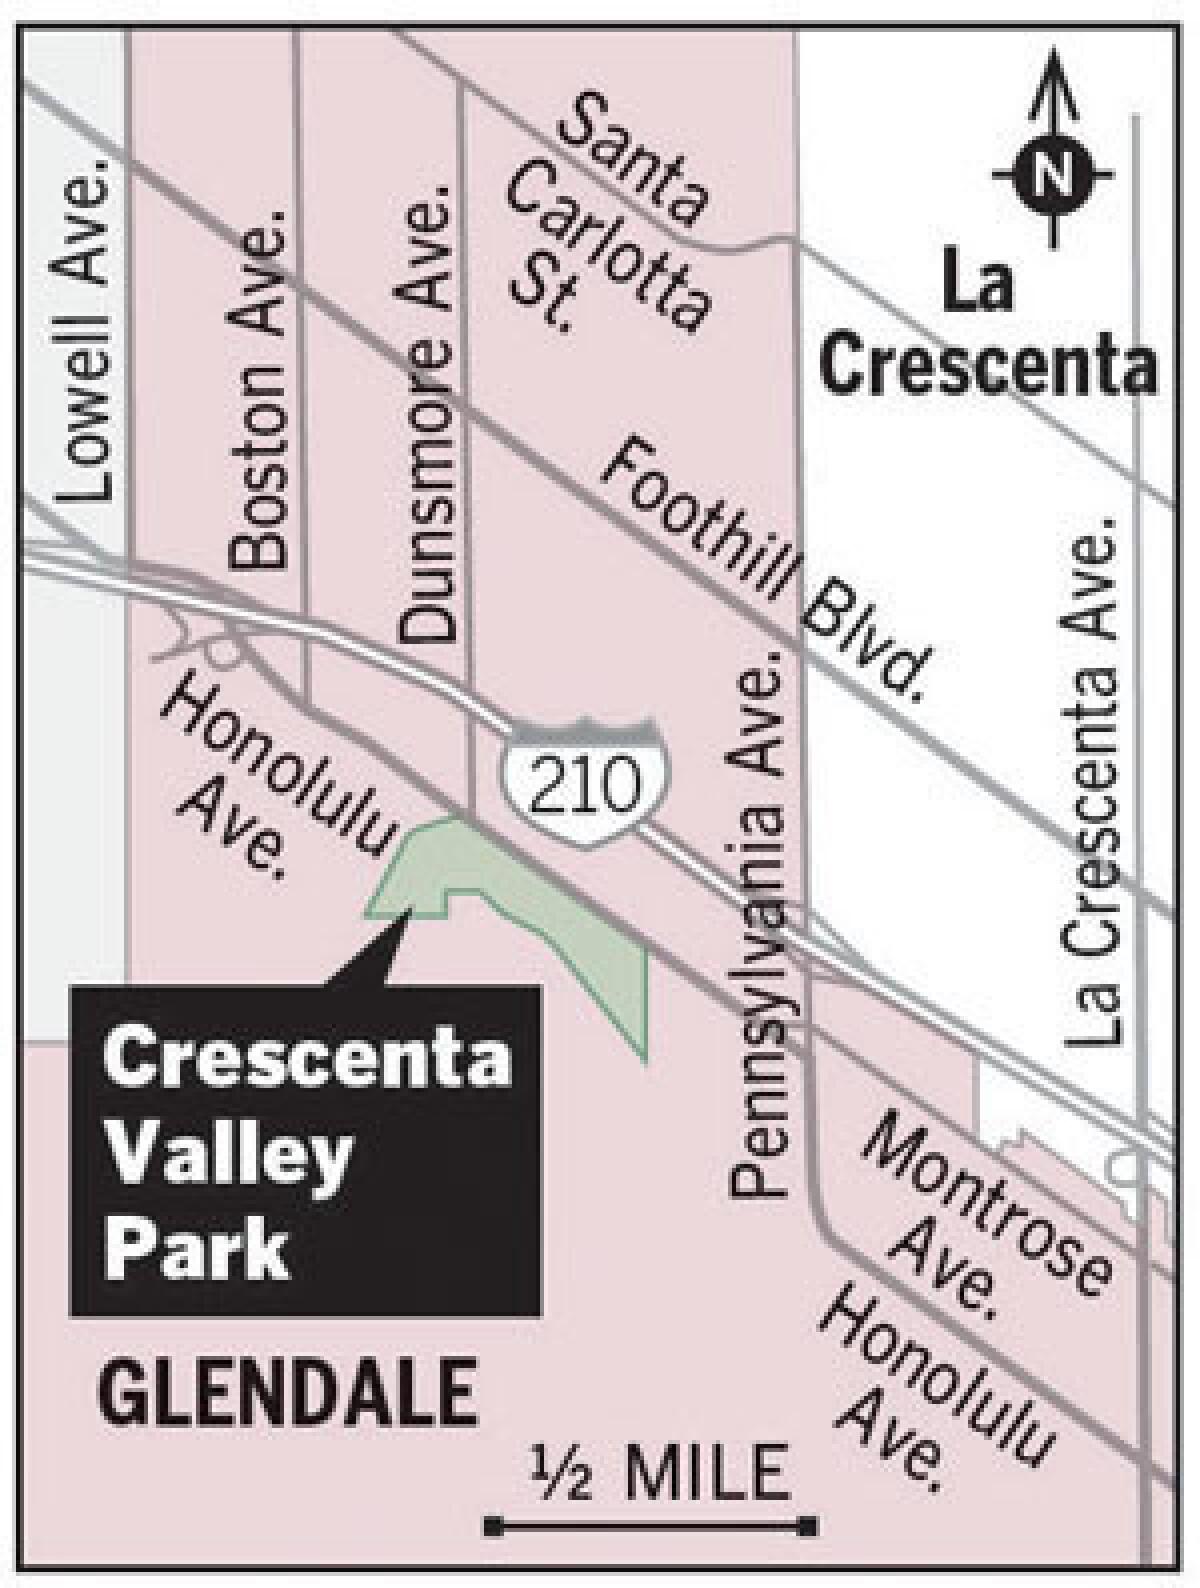 Los Angeles County Board of Supervisors approved a skate park located at Crescenta Valley Park.